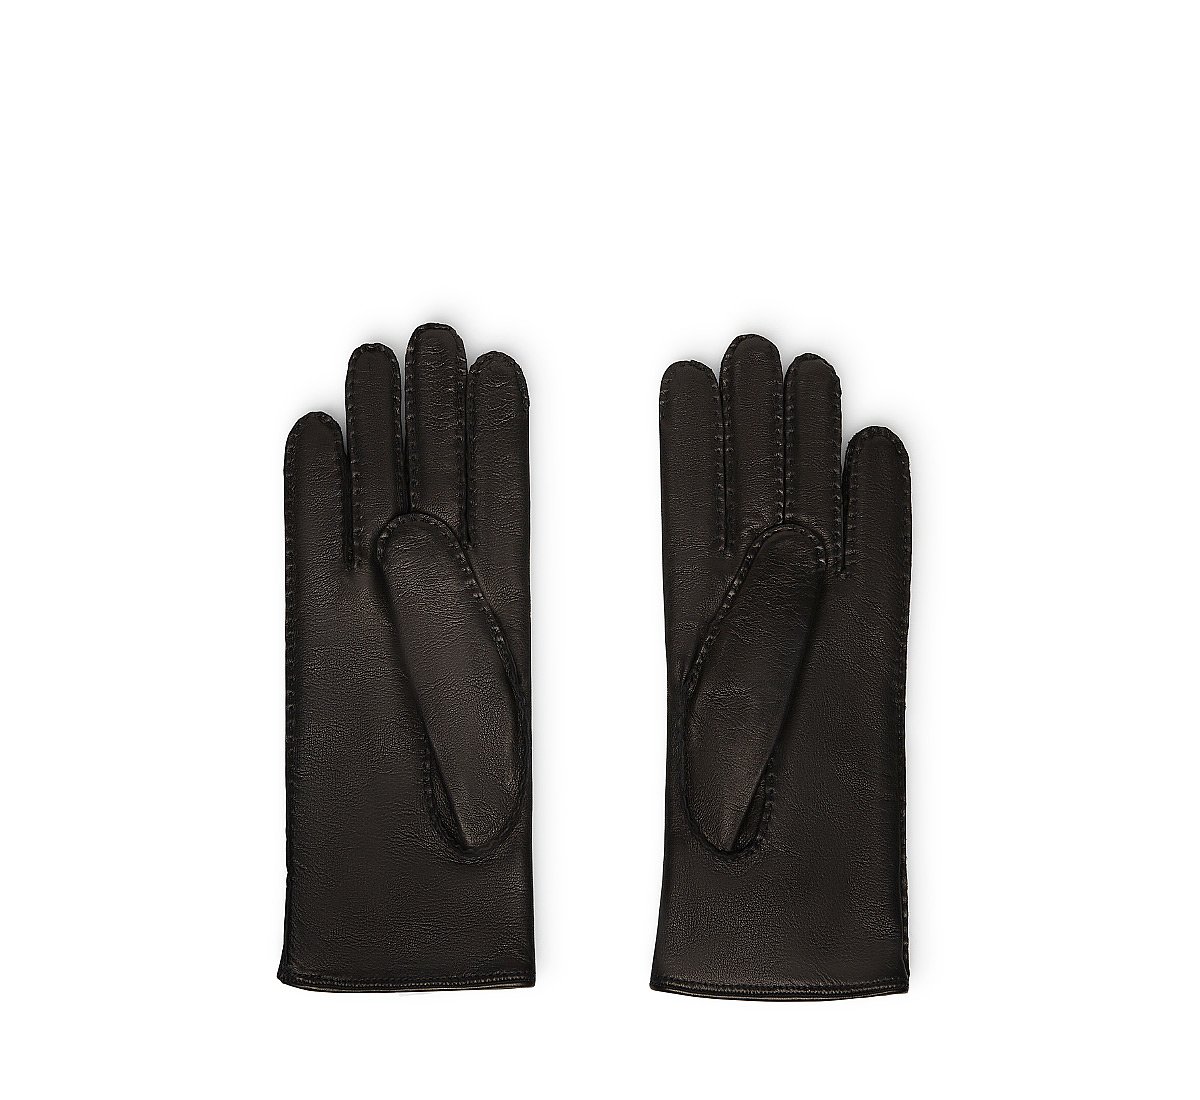 Gloves with stitching